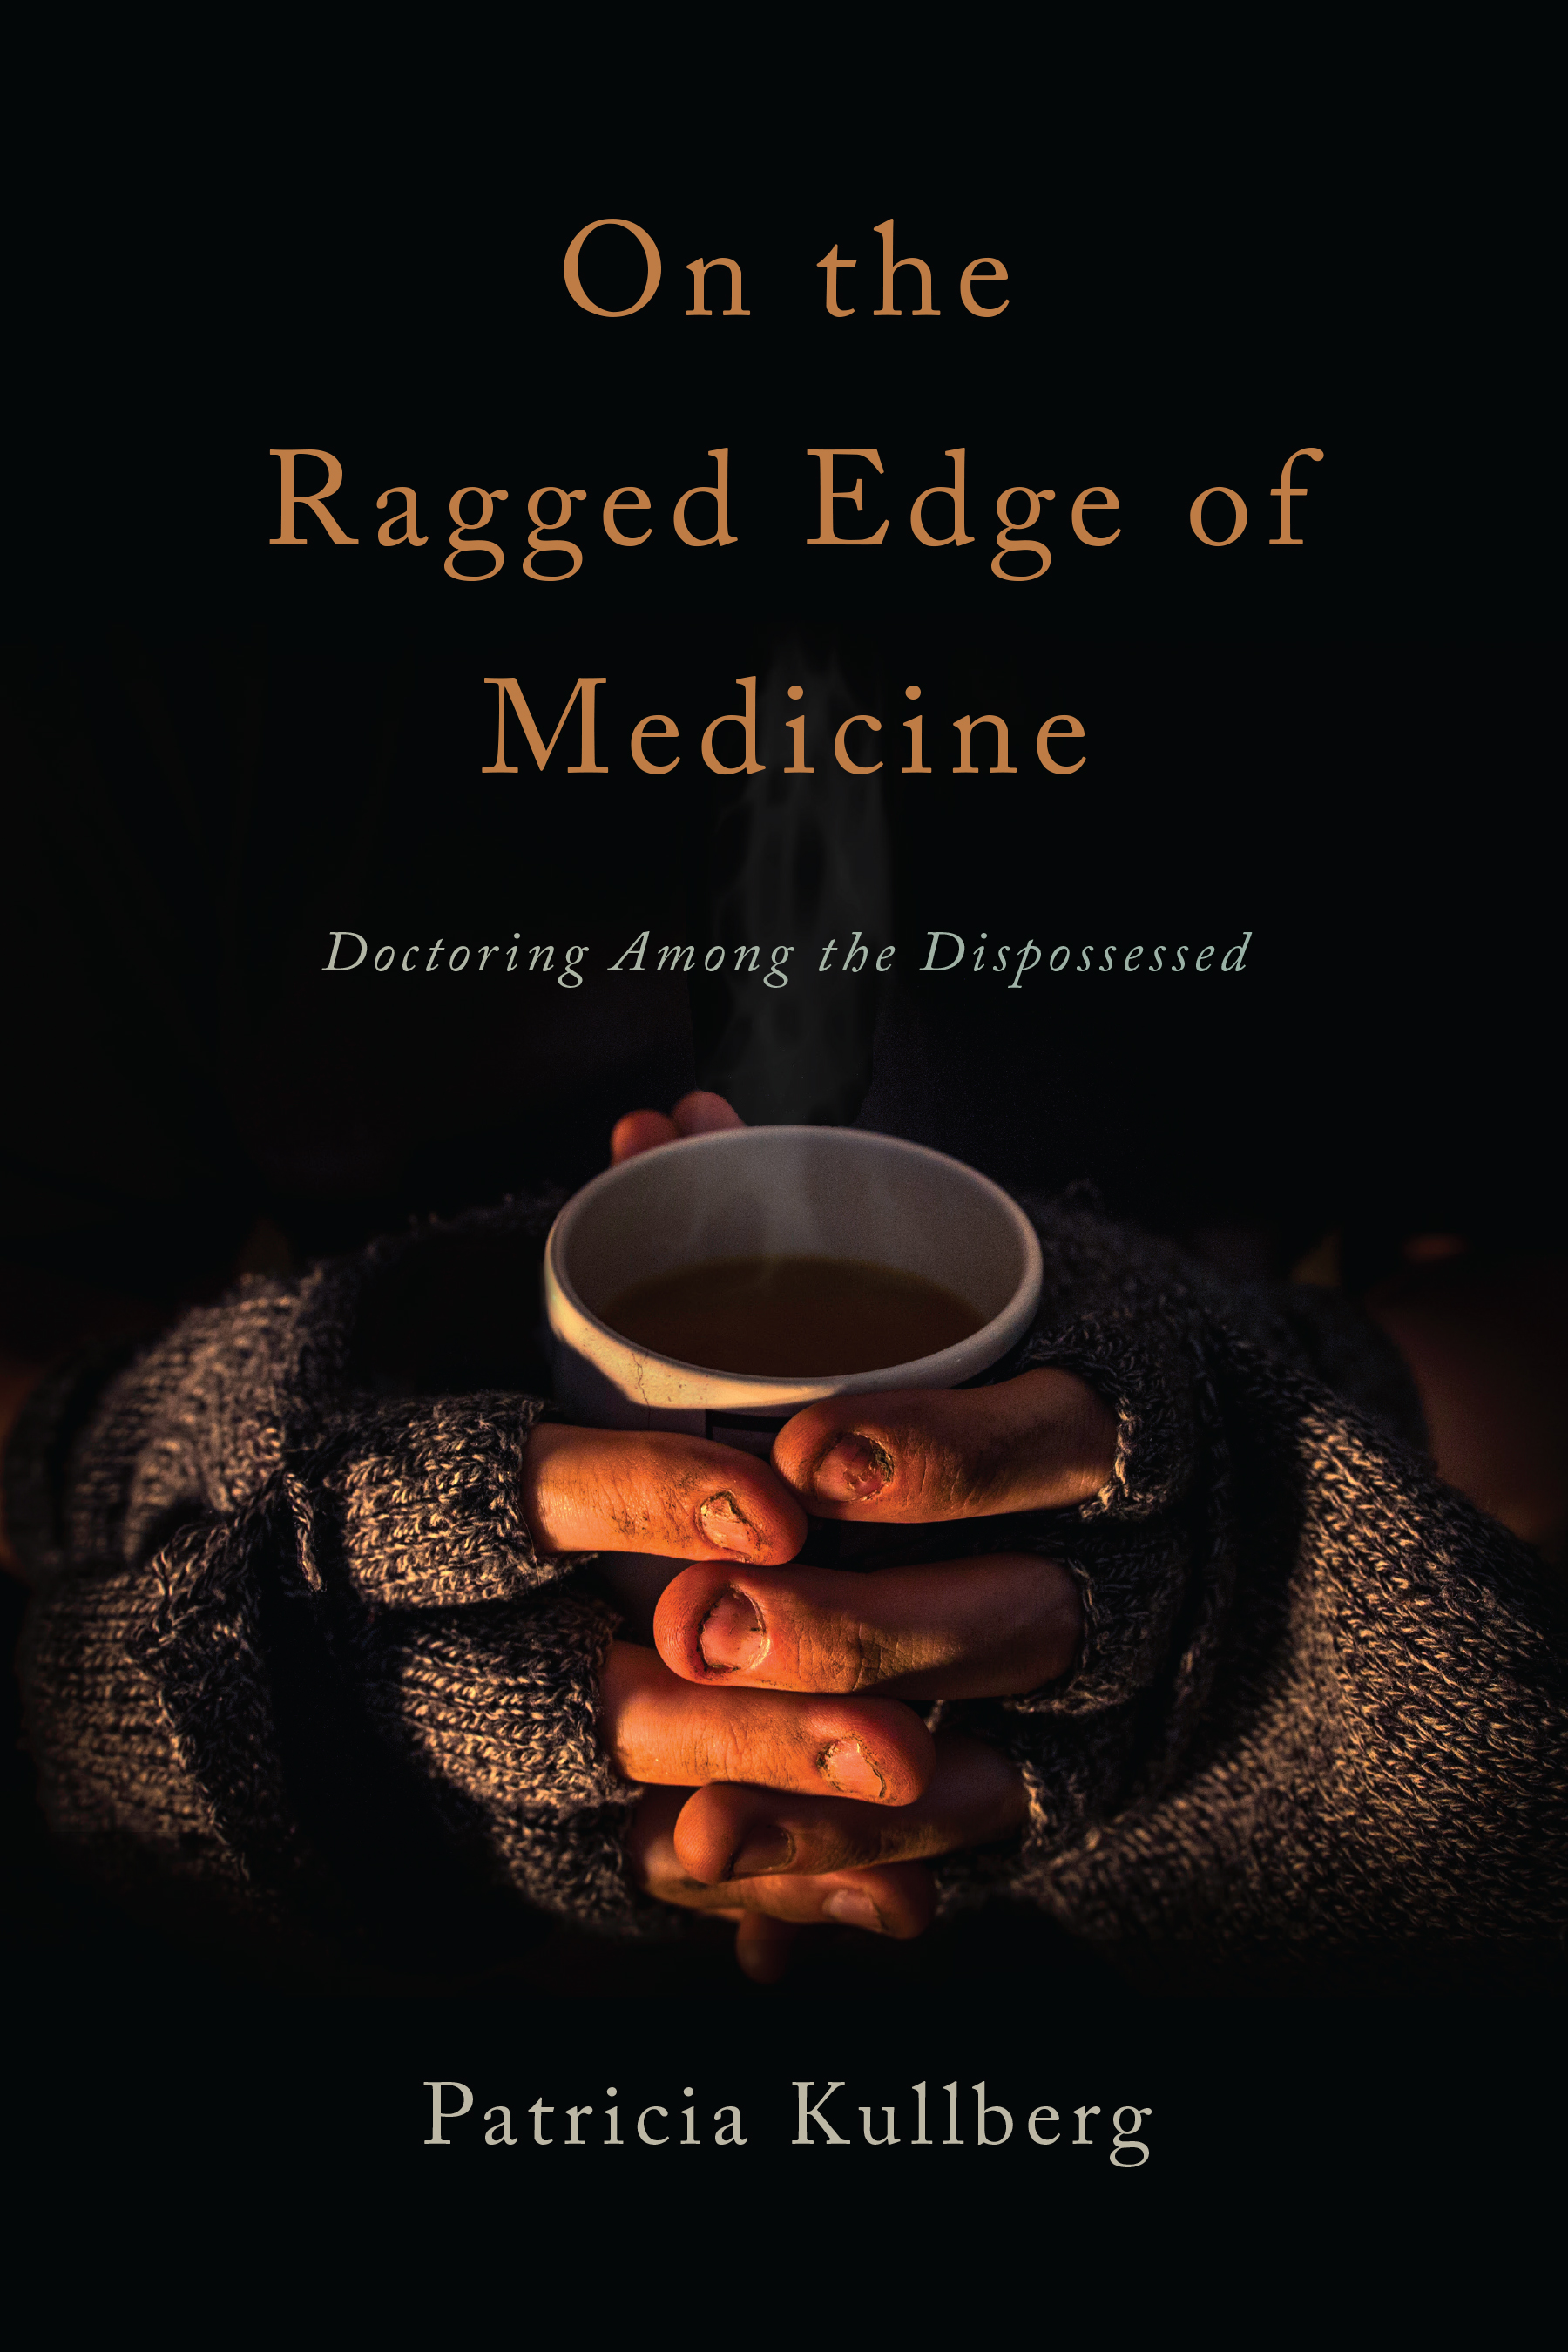 On the Ragged Edge of Medicine by Patricia Kullberg